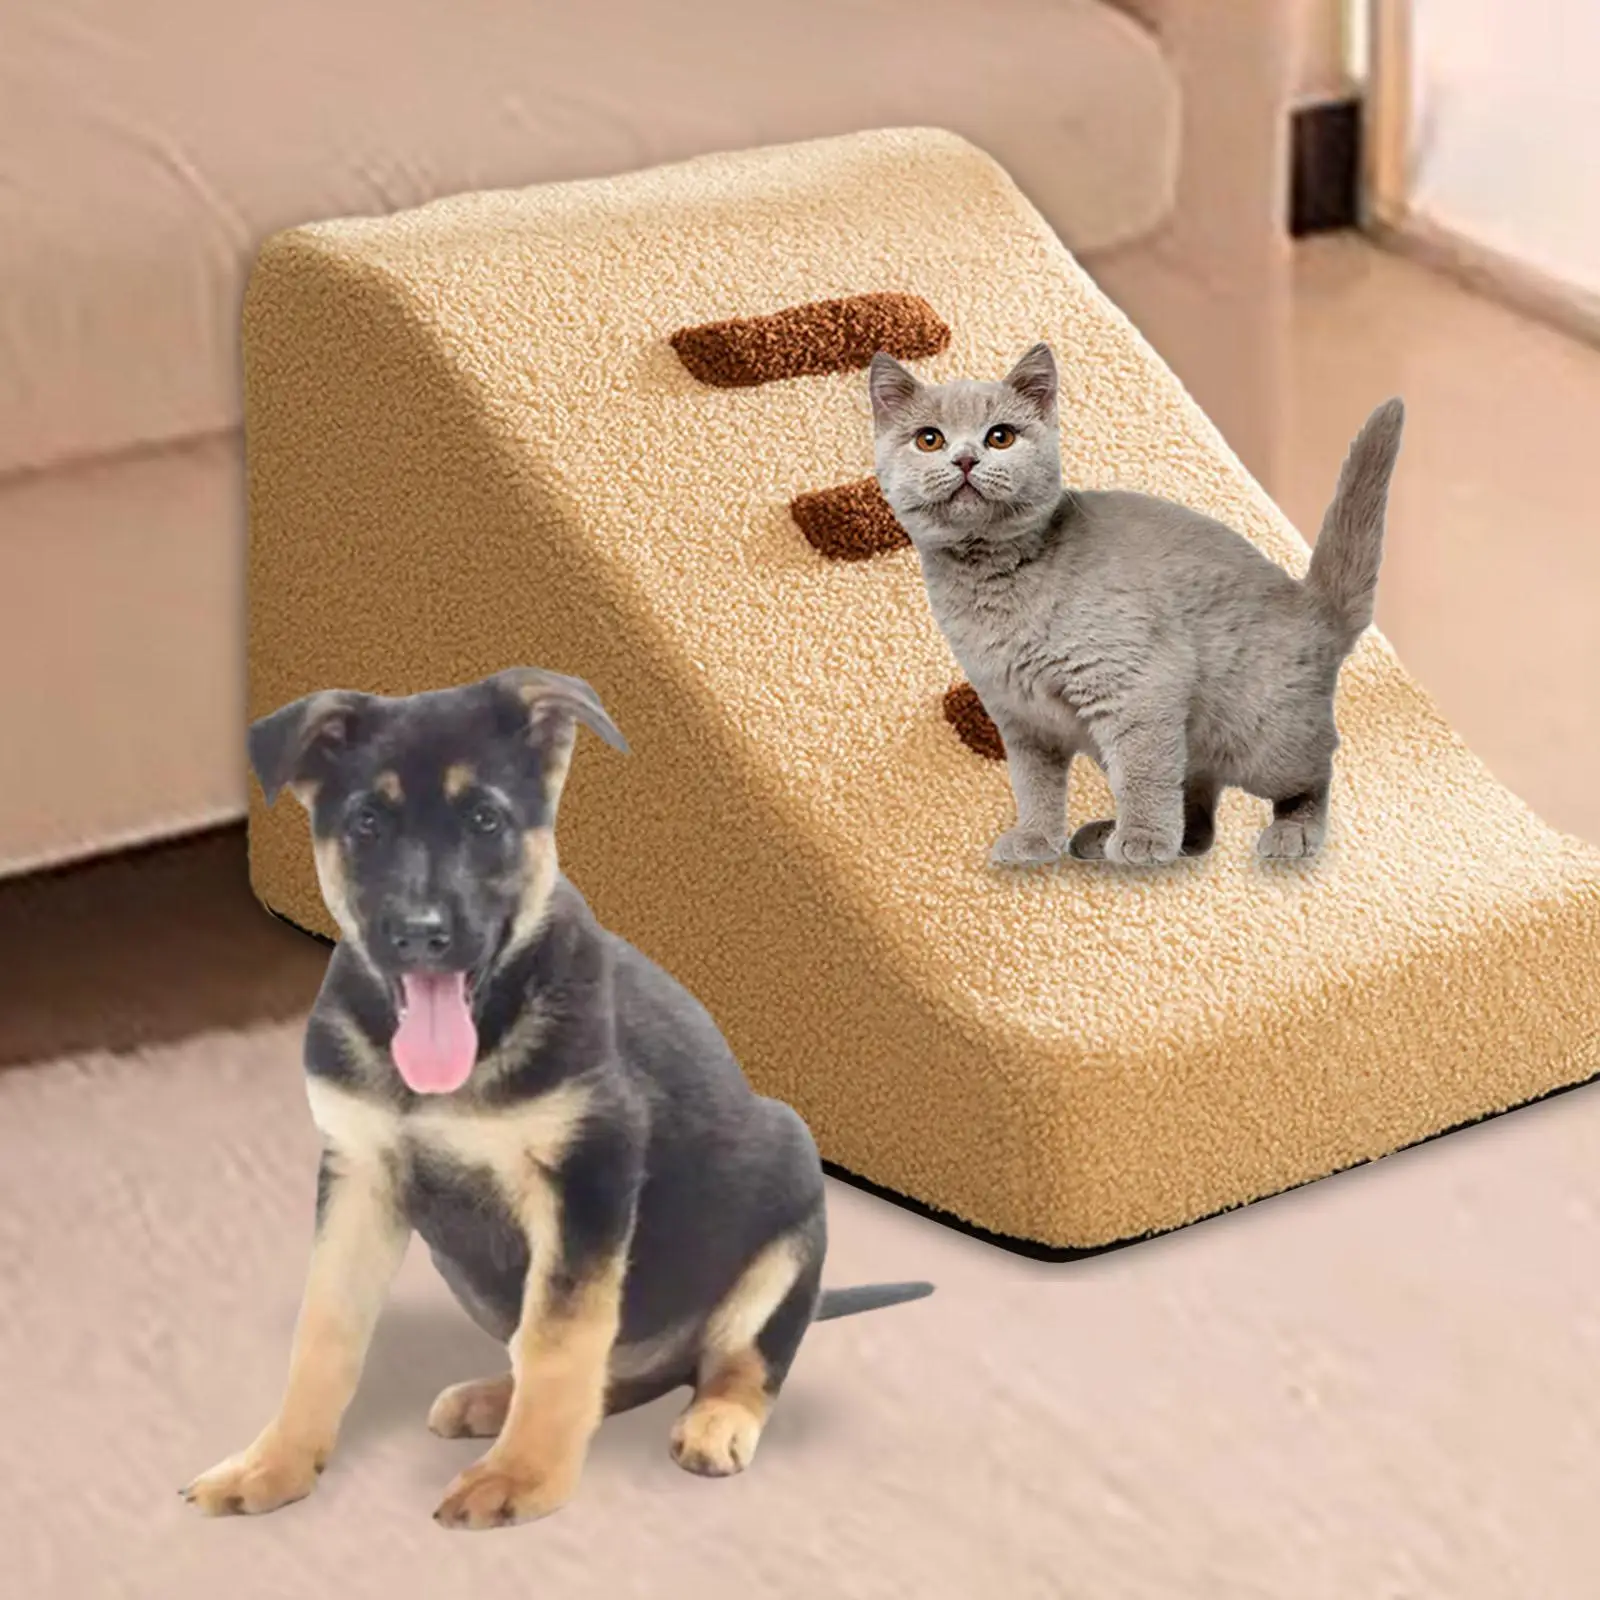 Dog Stairs Removable Cover Gentle Slope Shape Sturdy Soft for Older Dogs, Cats Portable Versatile Non Slip Dog Climbing Ladder